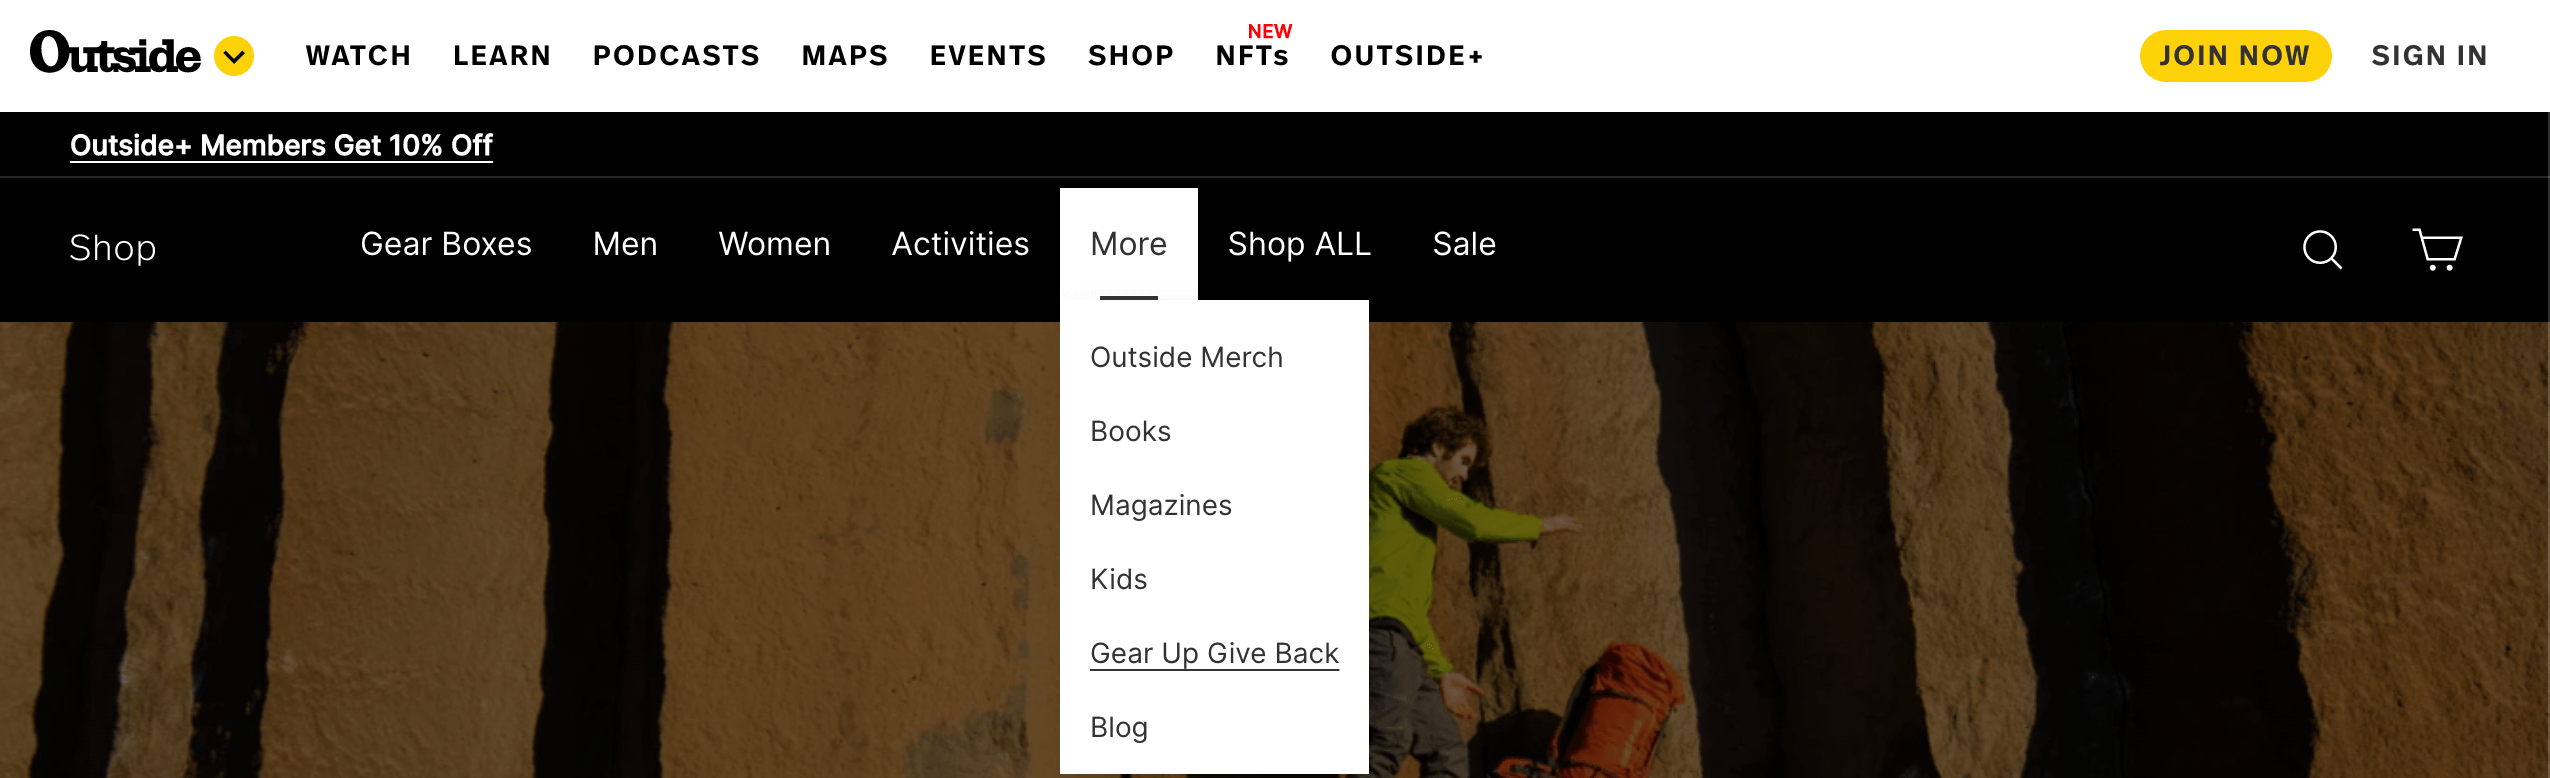 Users can find the Gear Up Give Back Program Directly from the Outside Store